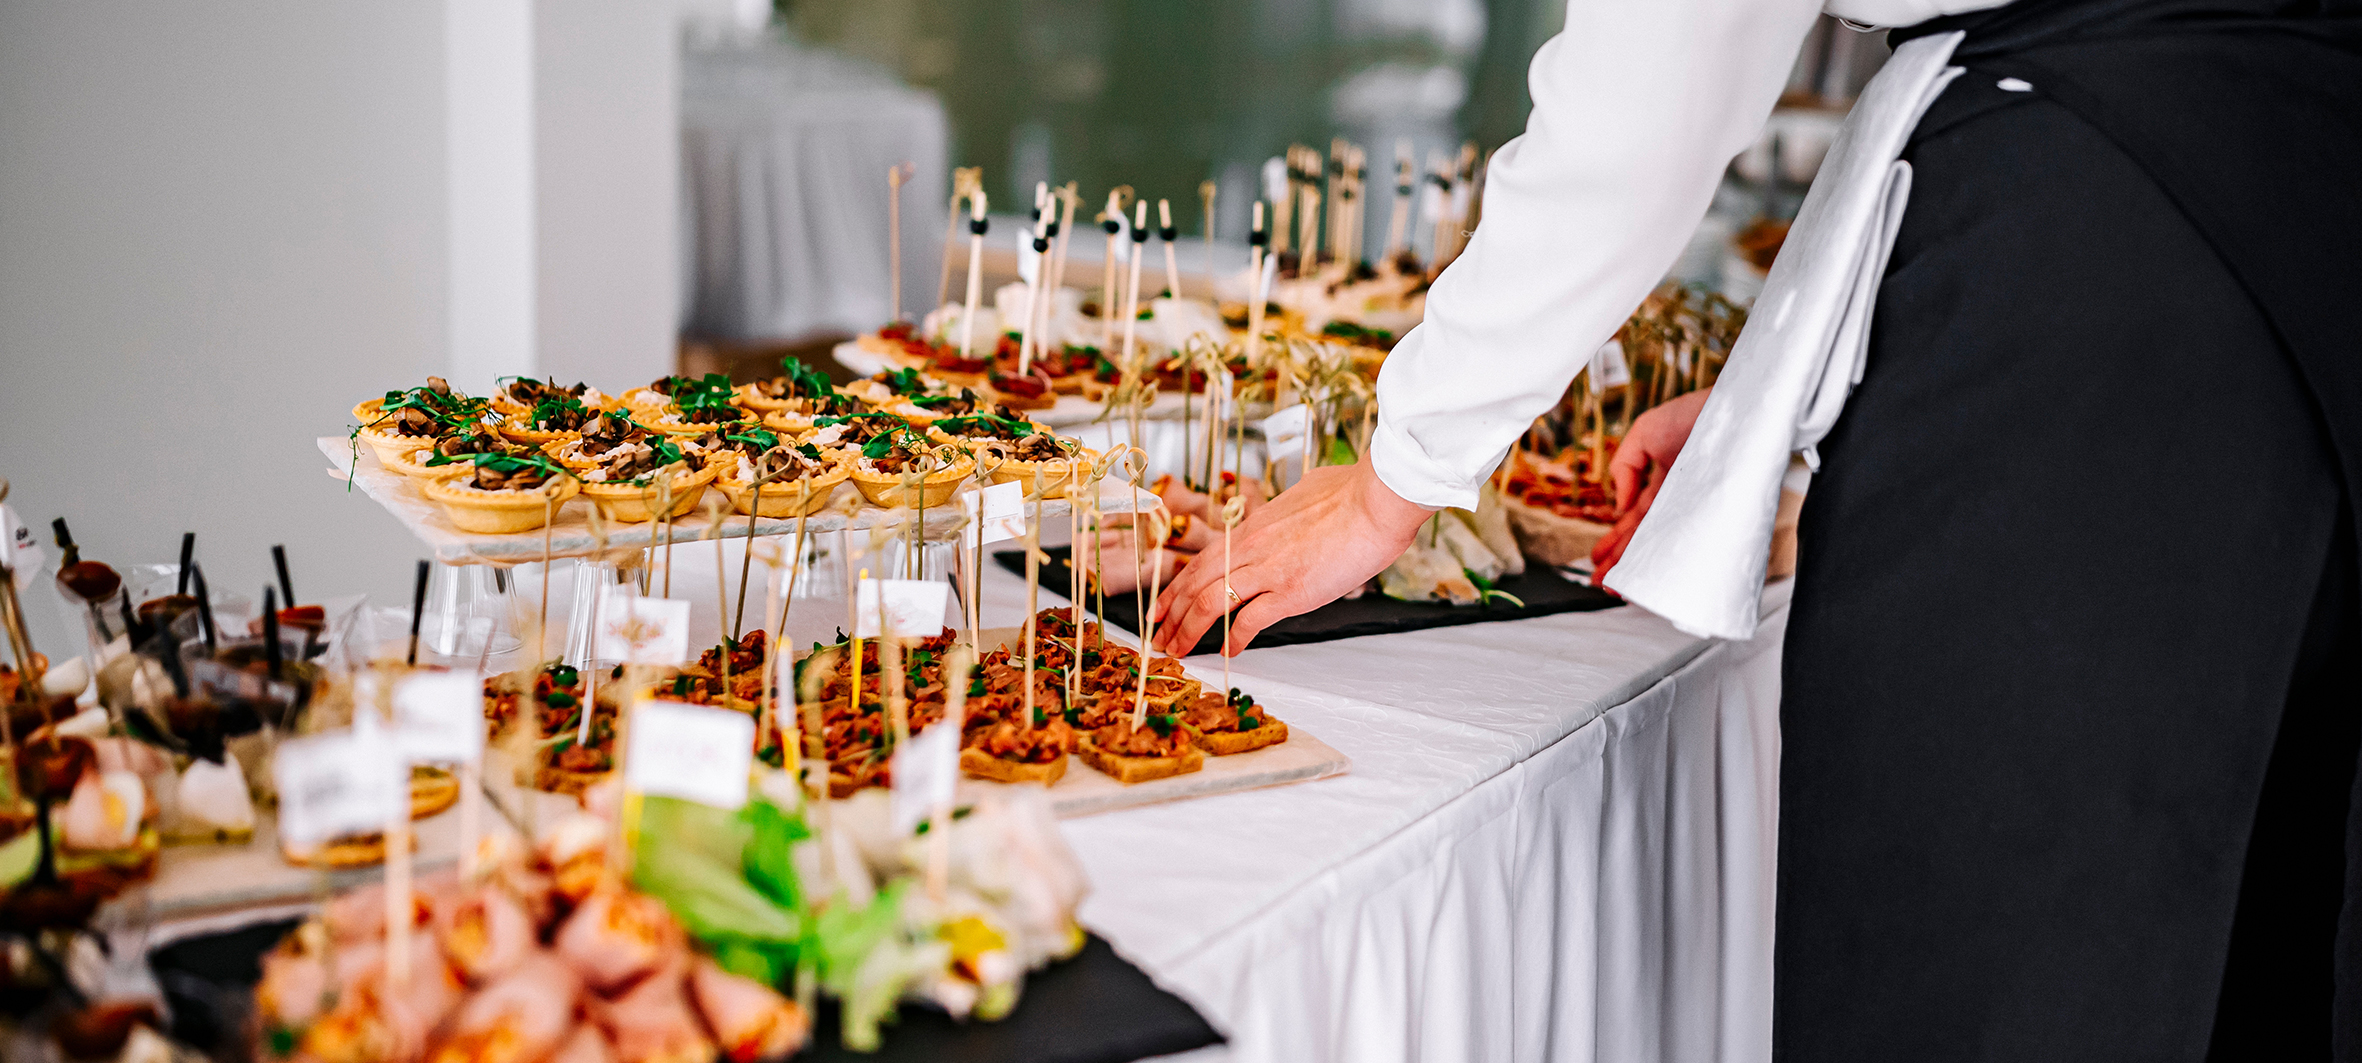 Indulge in Unparalleled Luxury: Our Exquisite Catering Services | Red Tag Caterers | luxury Catering Services in Chandigarh, top Catering Services in Chandigarh, corporate party Catering Services in Chandigarh, famous Catering Services in Chandigarh,  - GL116476